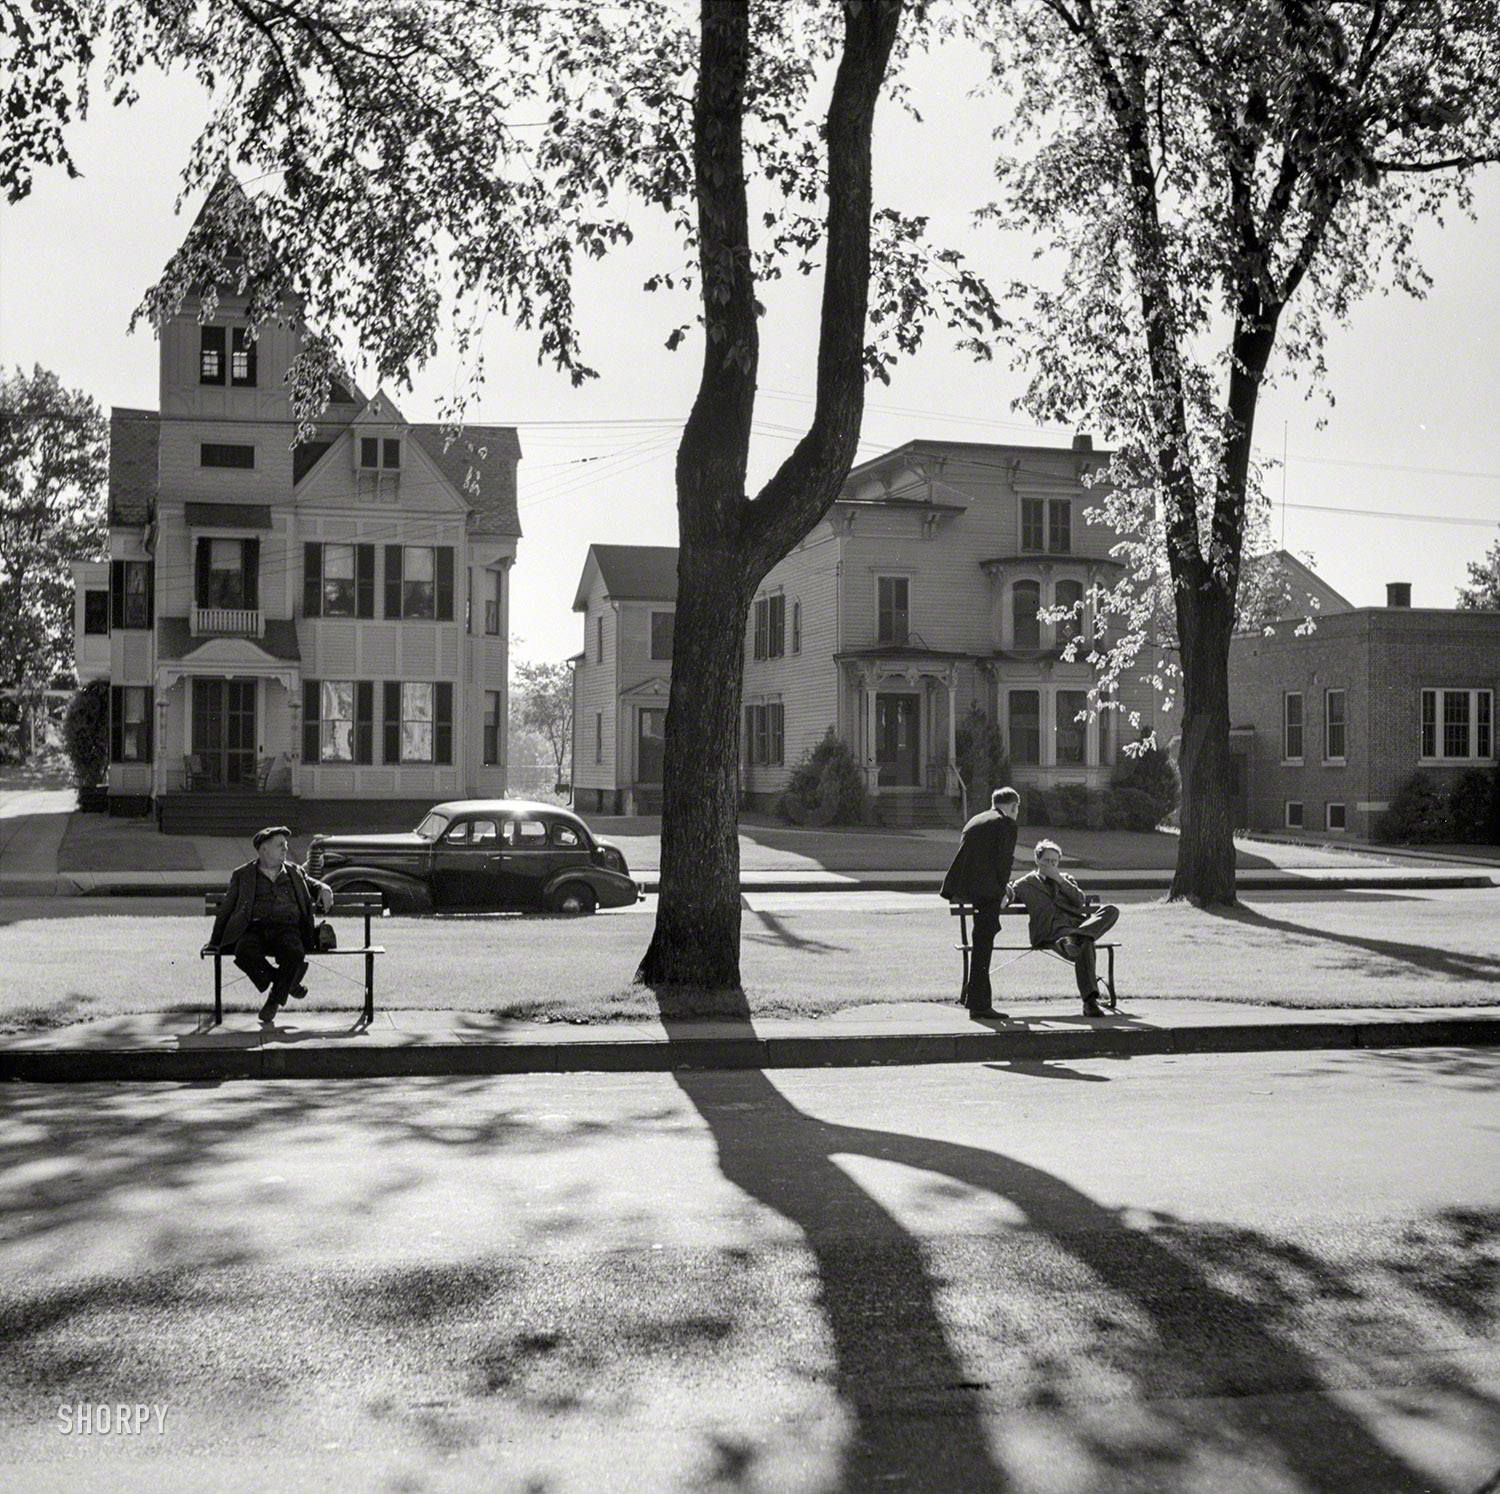 May 1942. Southington, Connecticut. "A street scene." Medium format negative by Fenno Jacobs for the Office of War Information. View full size.